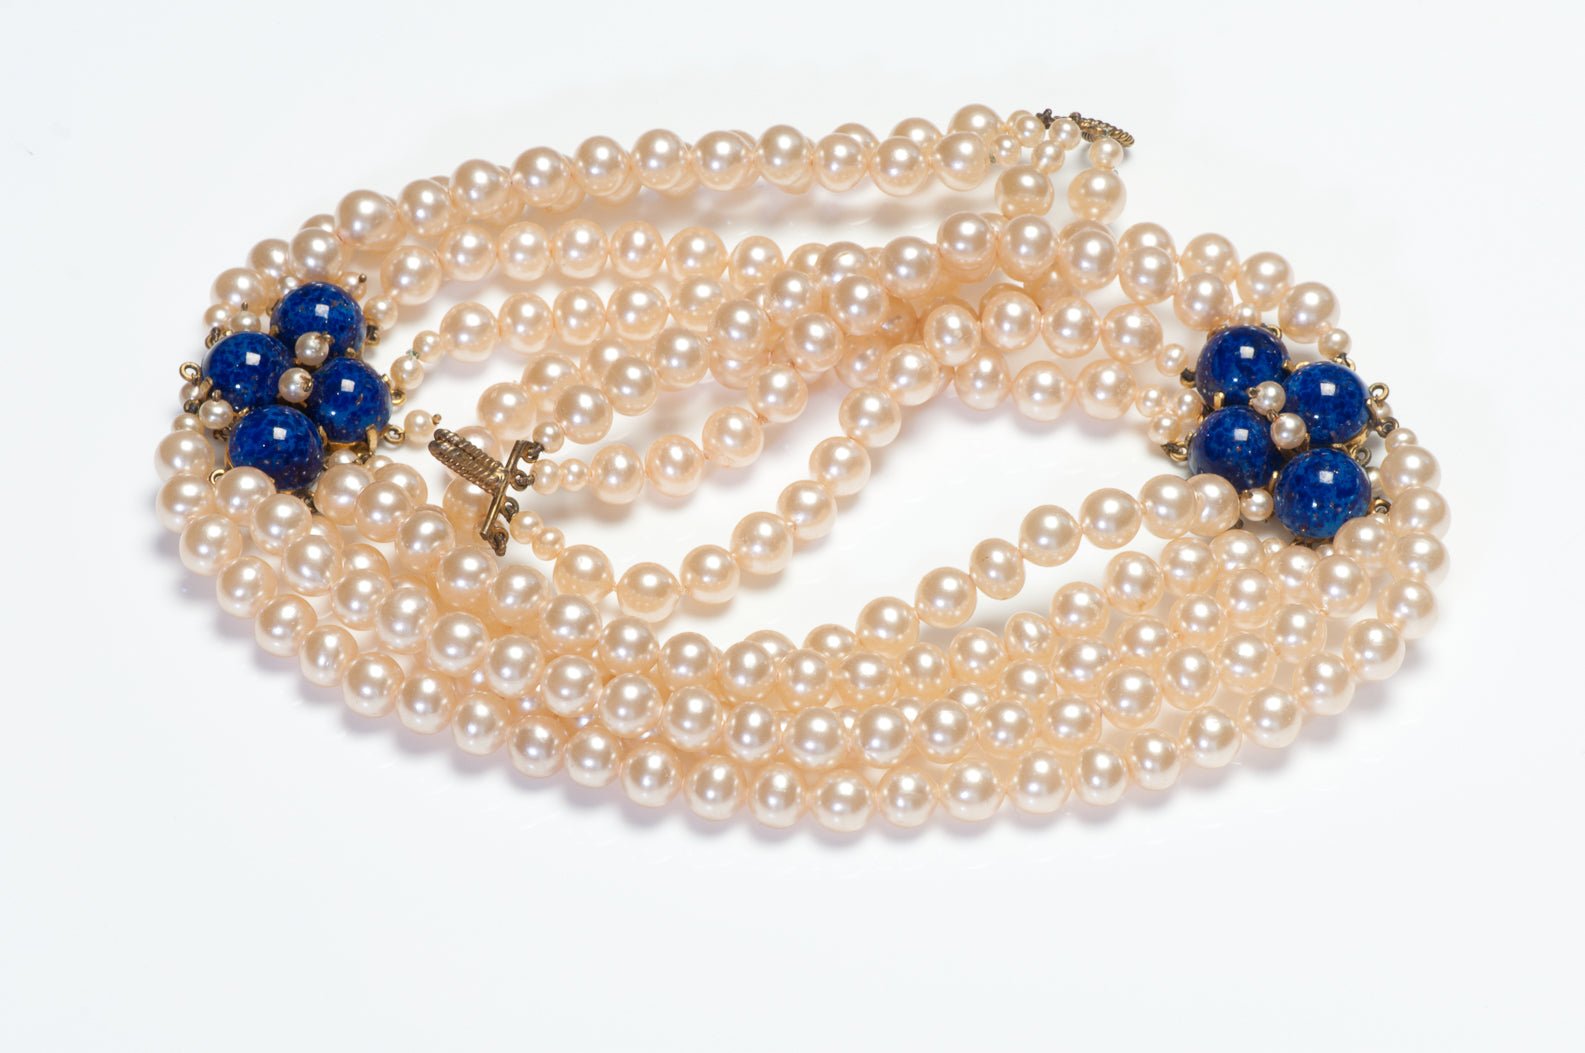 Christian Dior Paris Couture 1950's Blue Cabochon Glass Pearl Collar Necklace